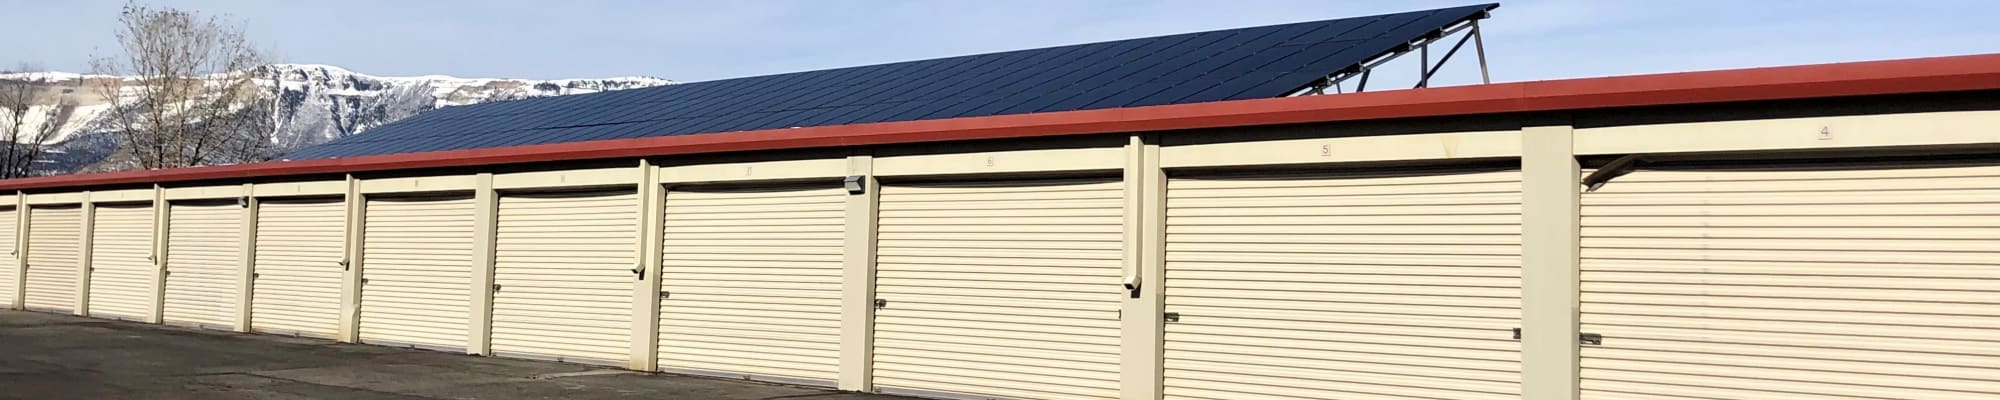 Exterior drive up climate controlled units at modSTORAGE Rifle in Rifle, Colorado